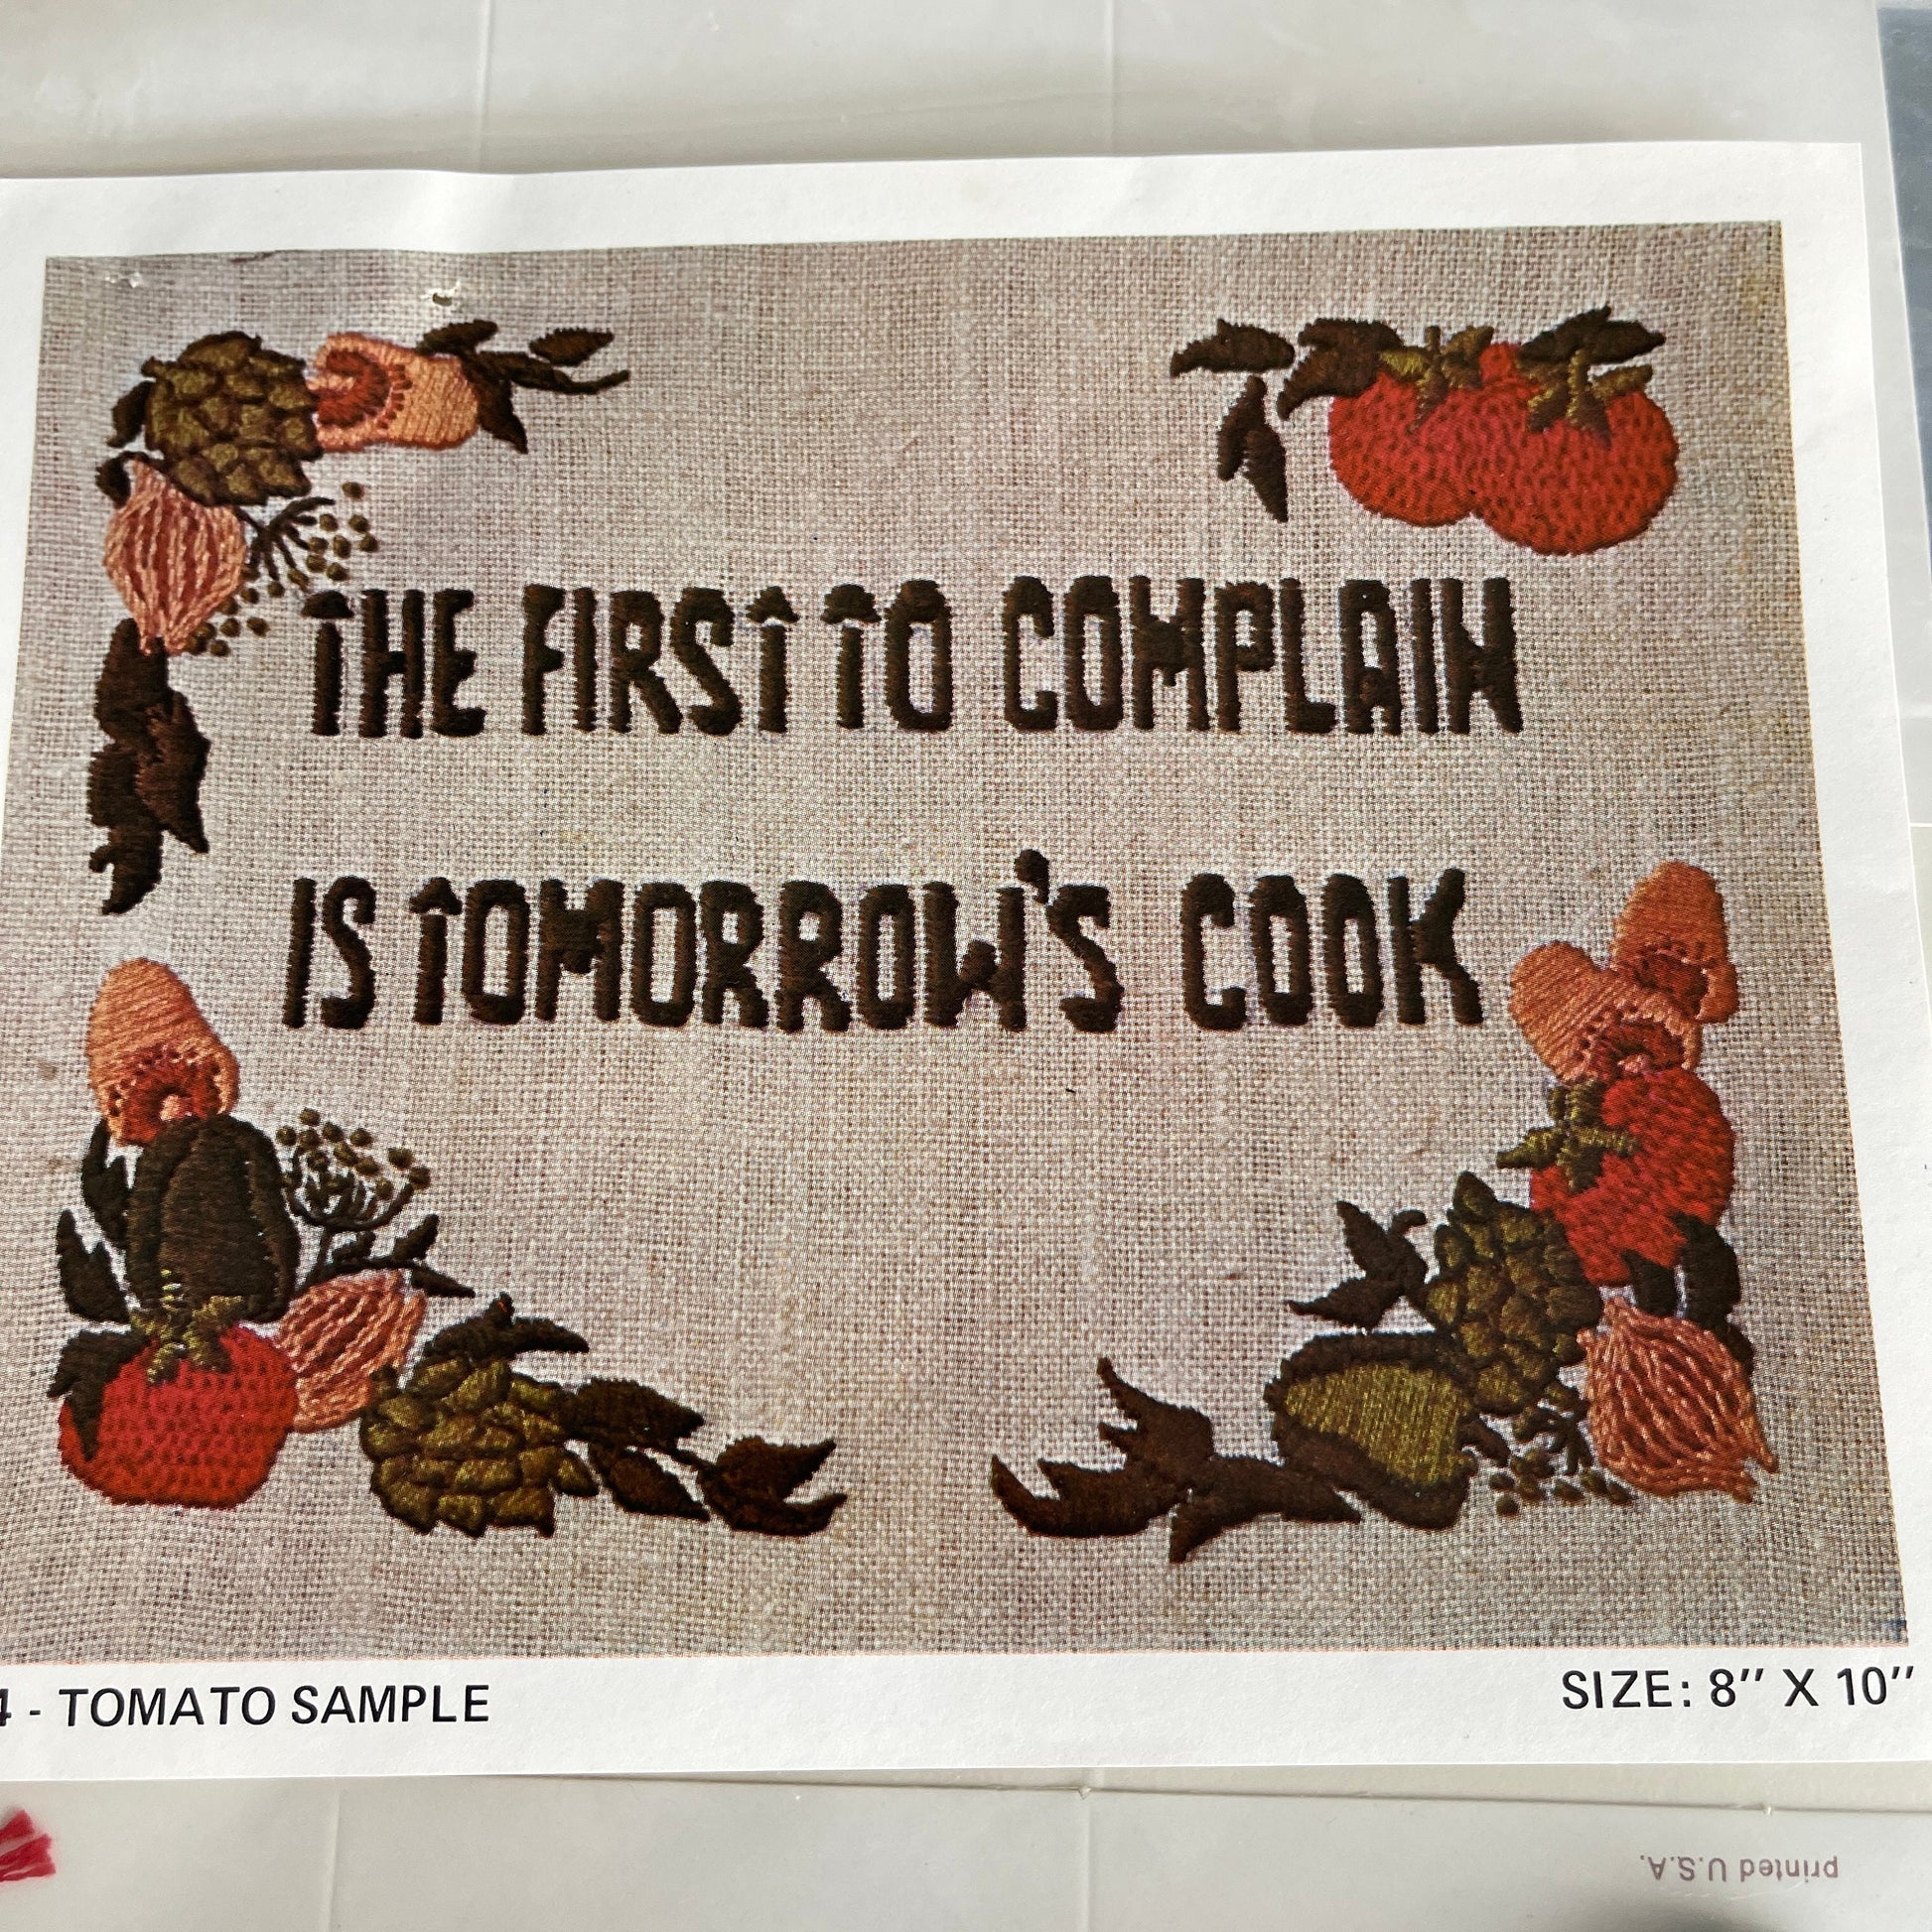 Tomato Sample "The First To Complain Is Tomorrow's Cook" Vintage Embroidery Kit